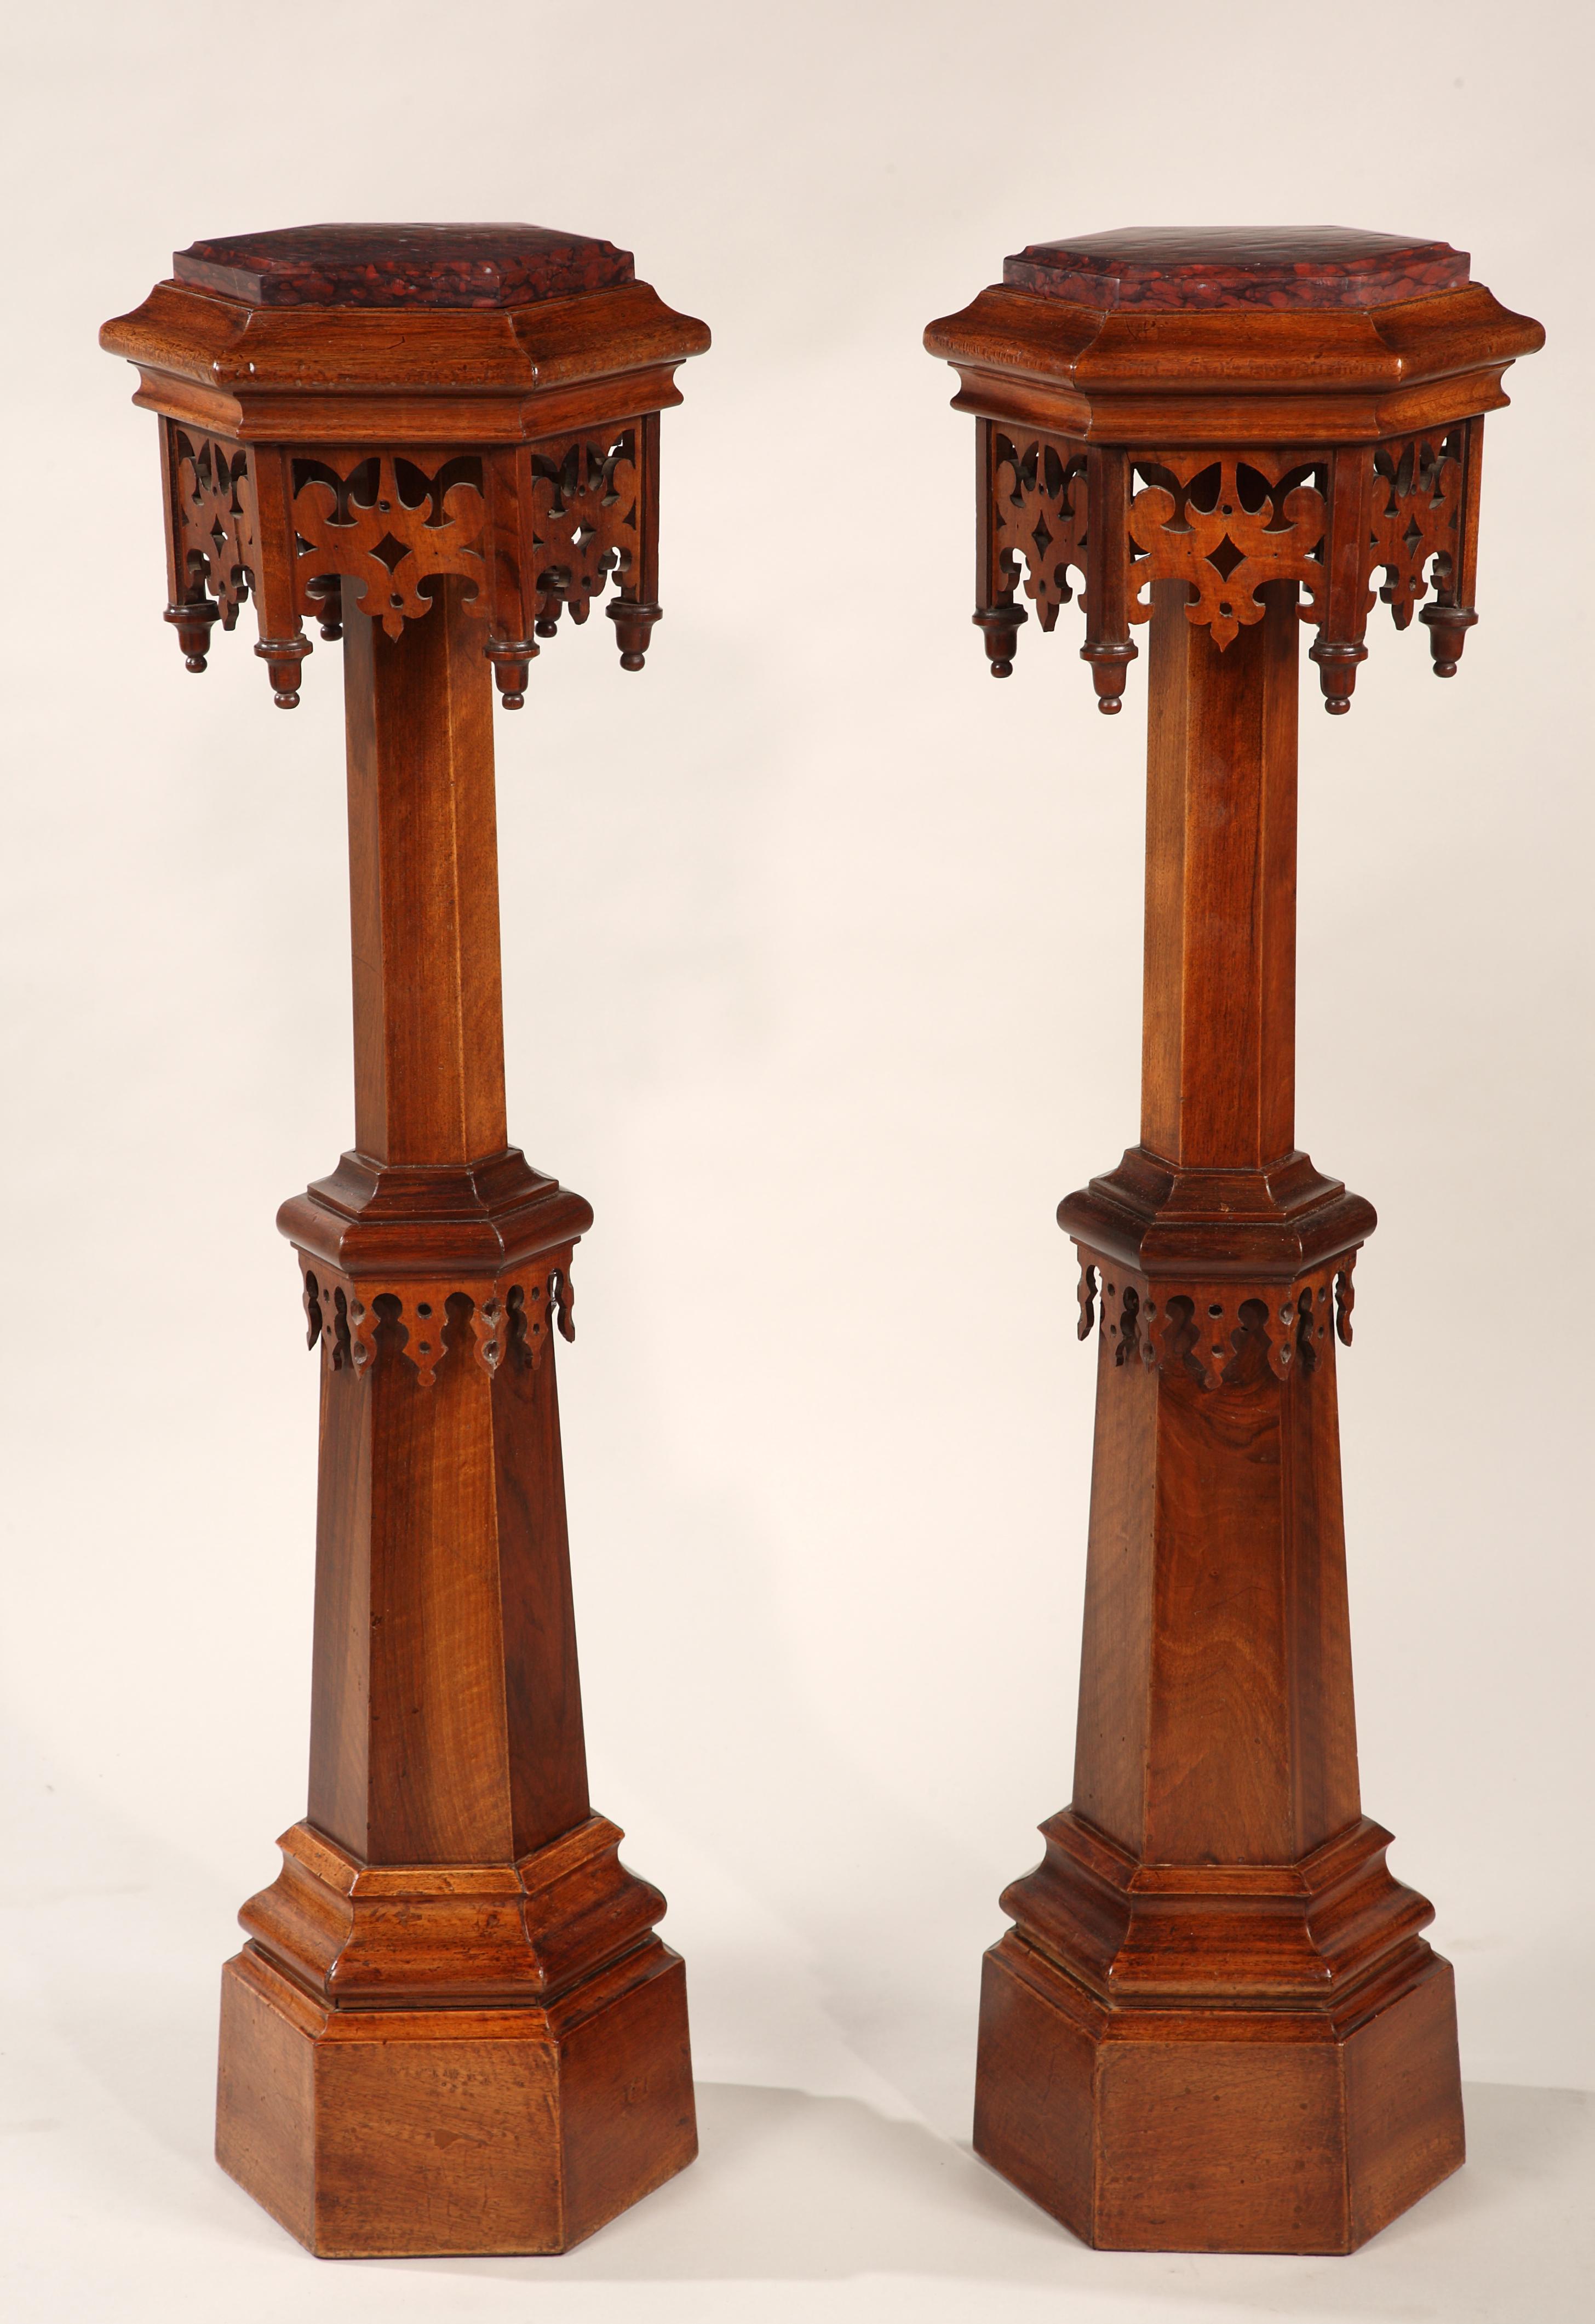 A very fine pair of Gothic Revival natural wood stands. Each composed of a hexagonal molded red Griotte marble top, resting on a hexagonal tapering shaft. Adorned all-over with carved and pierced walnut pinnacles and lambrequins.

The somewhat